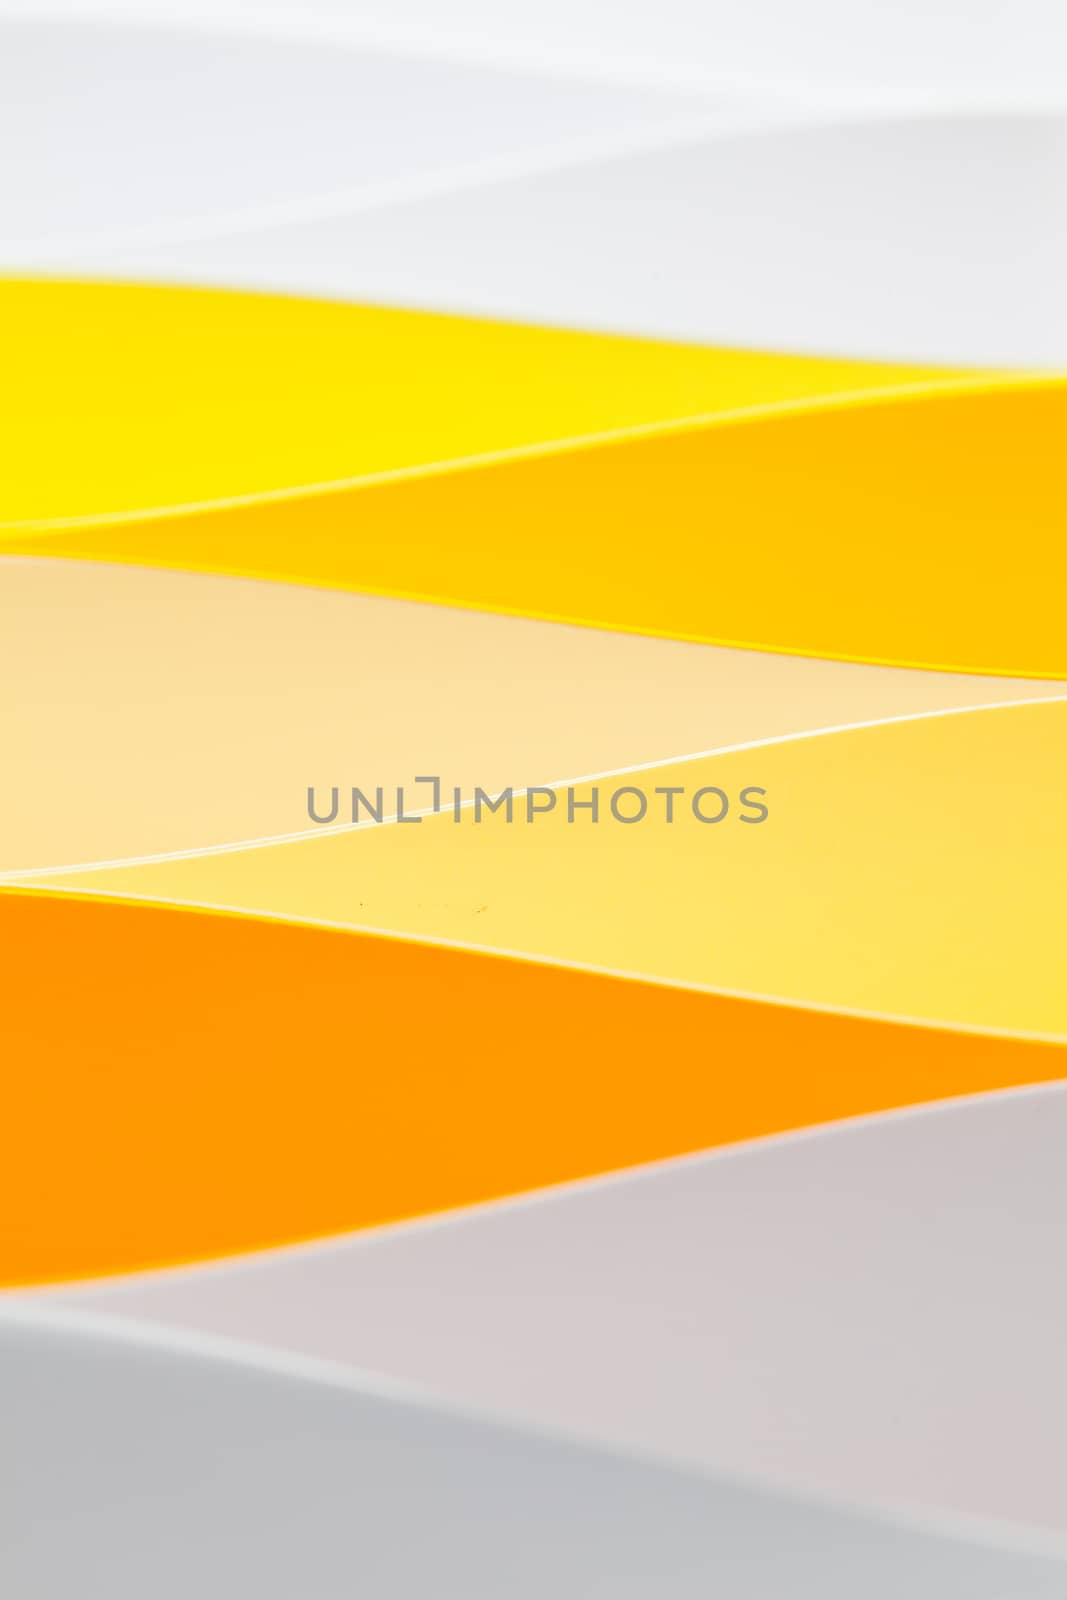 Abstract background image of pattern made by curved paper.